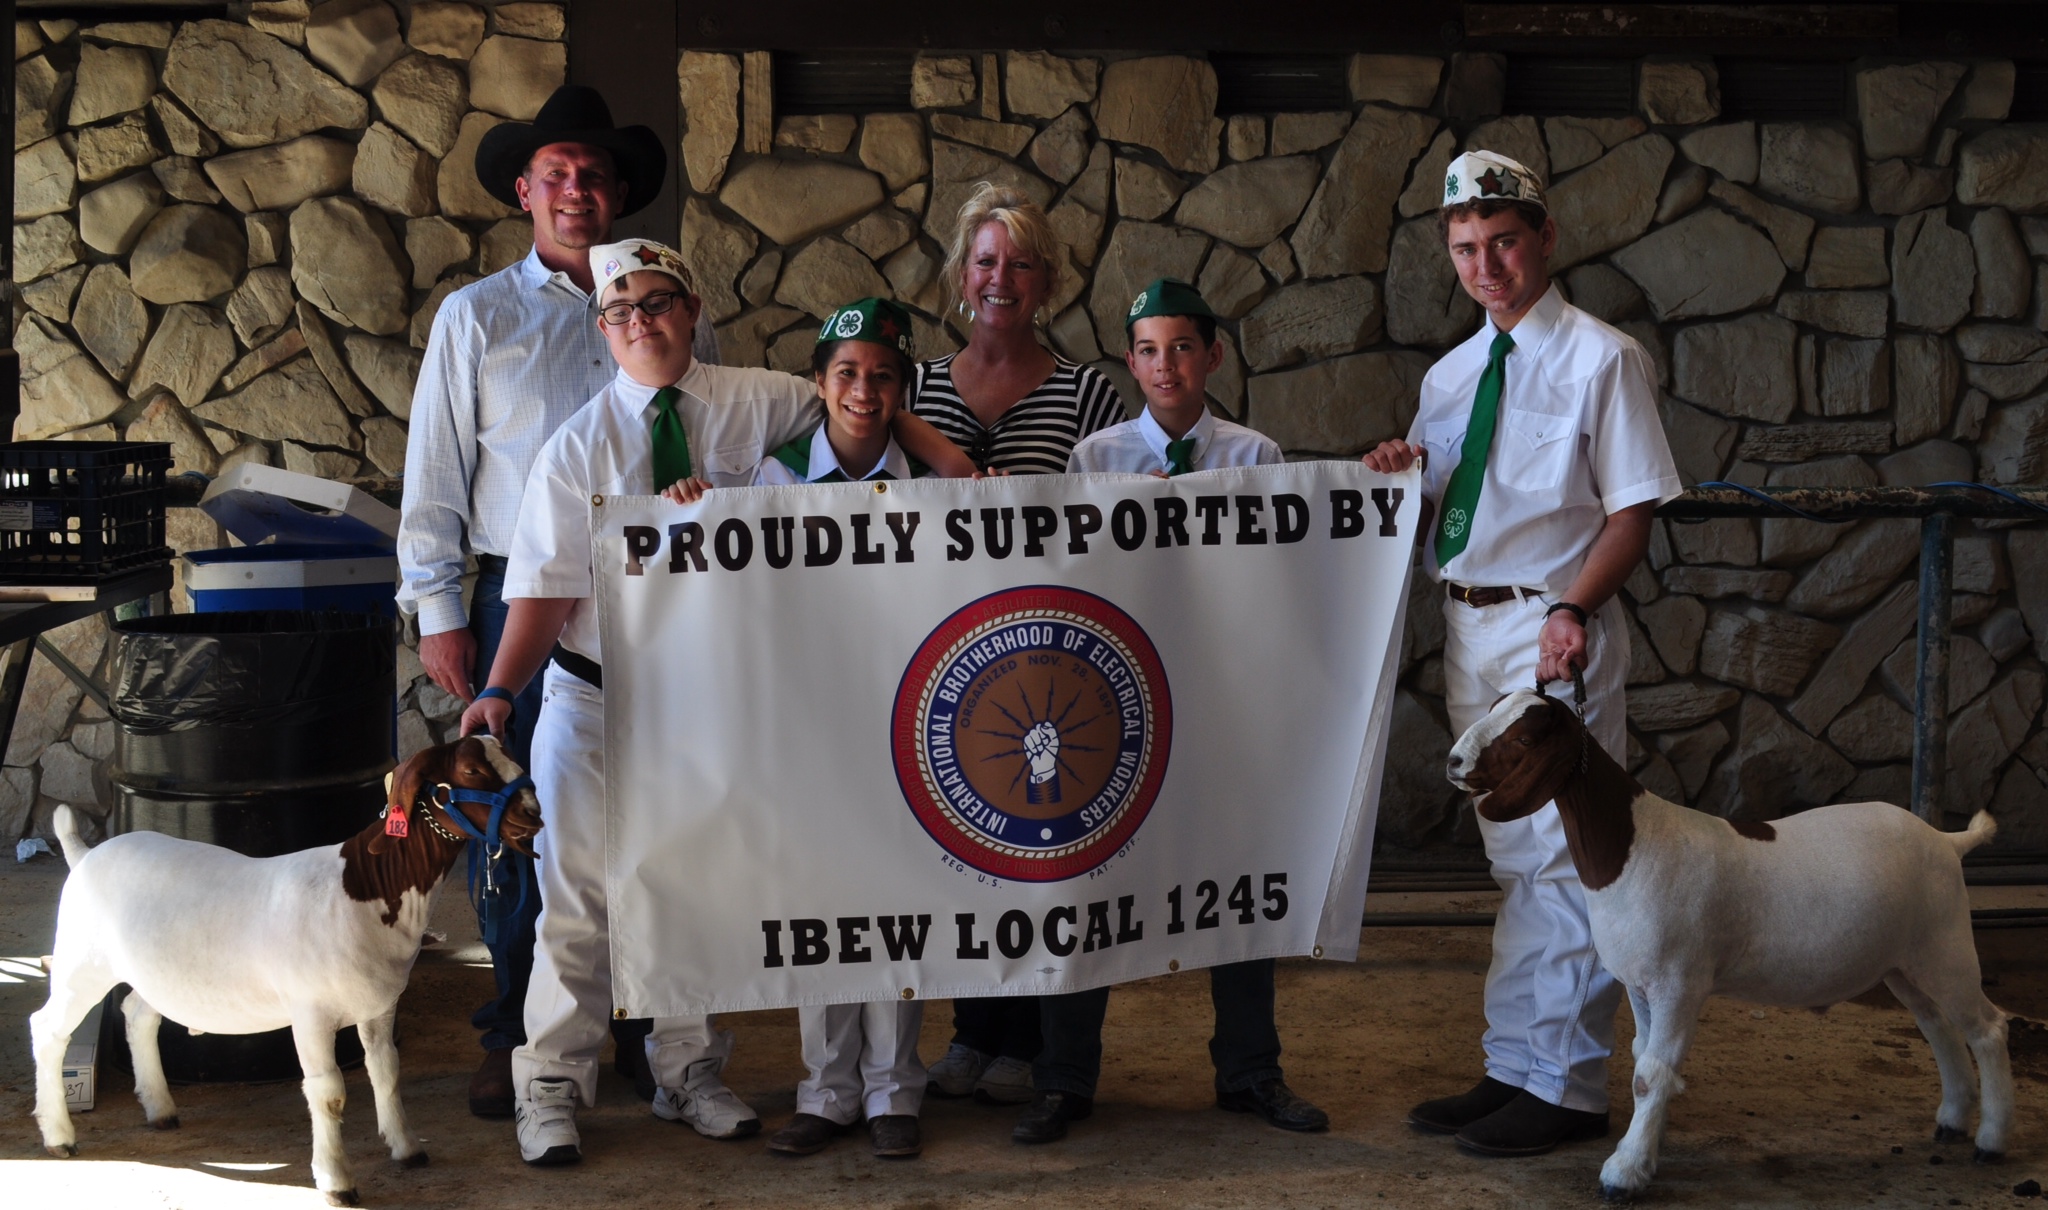 Picture from left to right: Bryan Anderson, Ty Fansler, Marhya Rivera-Orosko, Rene Tierney, Jonathon Nunez, Matthew Tierney. The goats are named Bryan and Lucky.